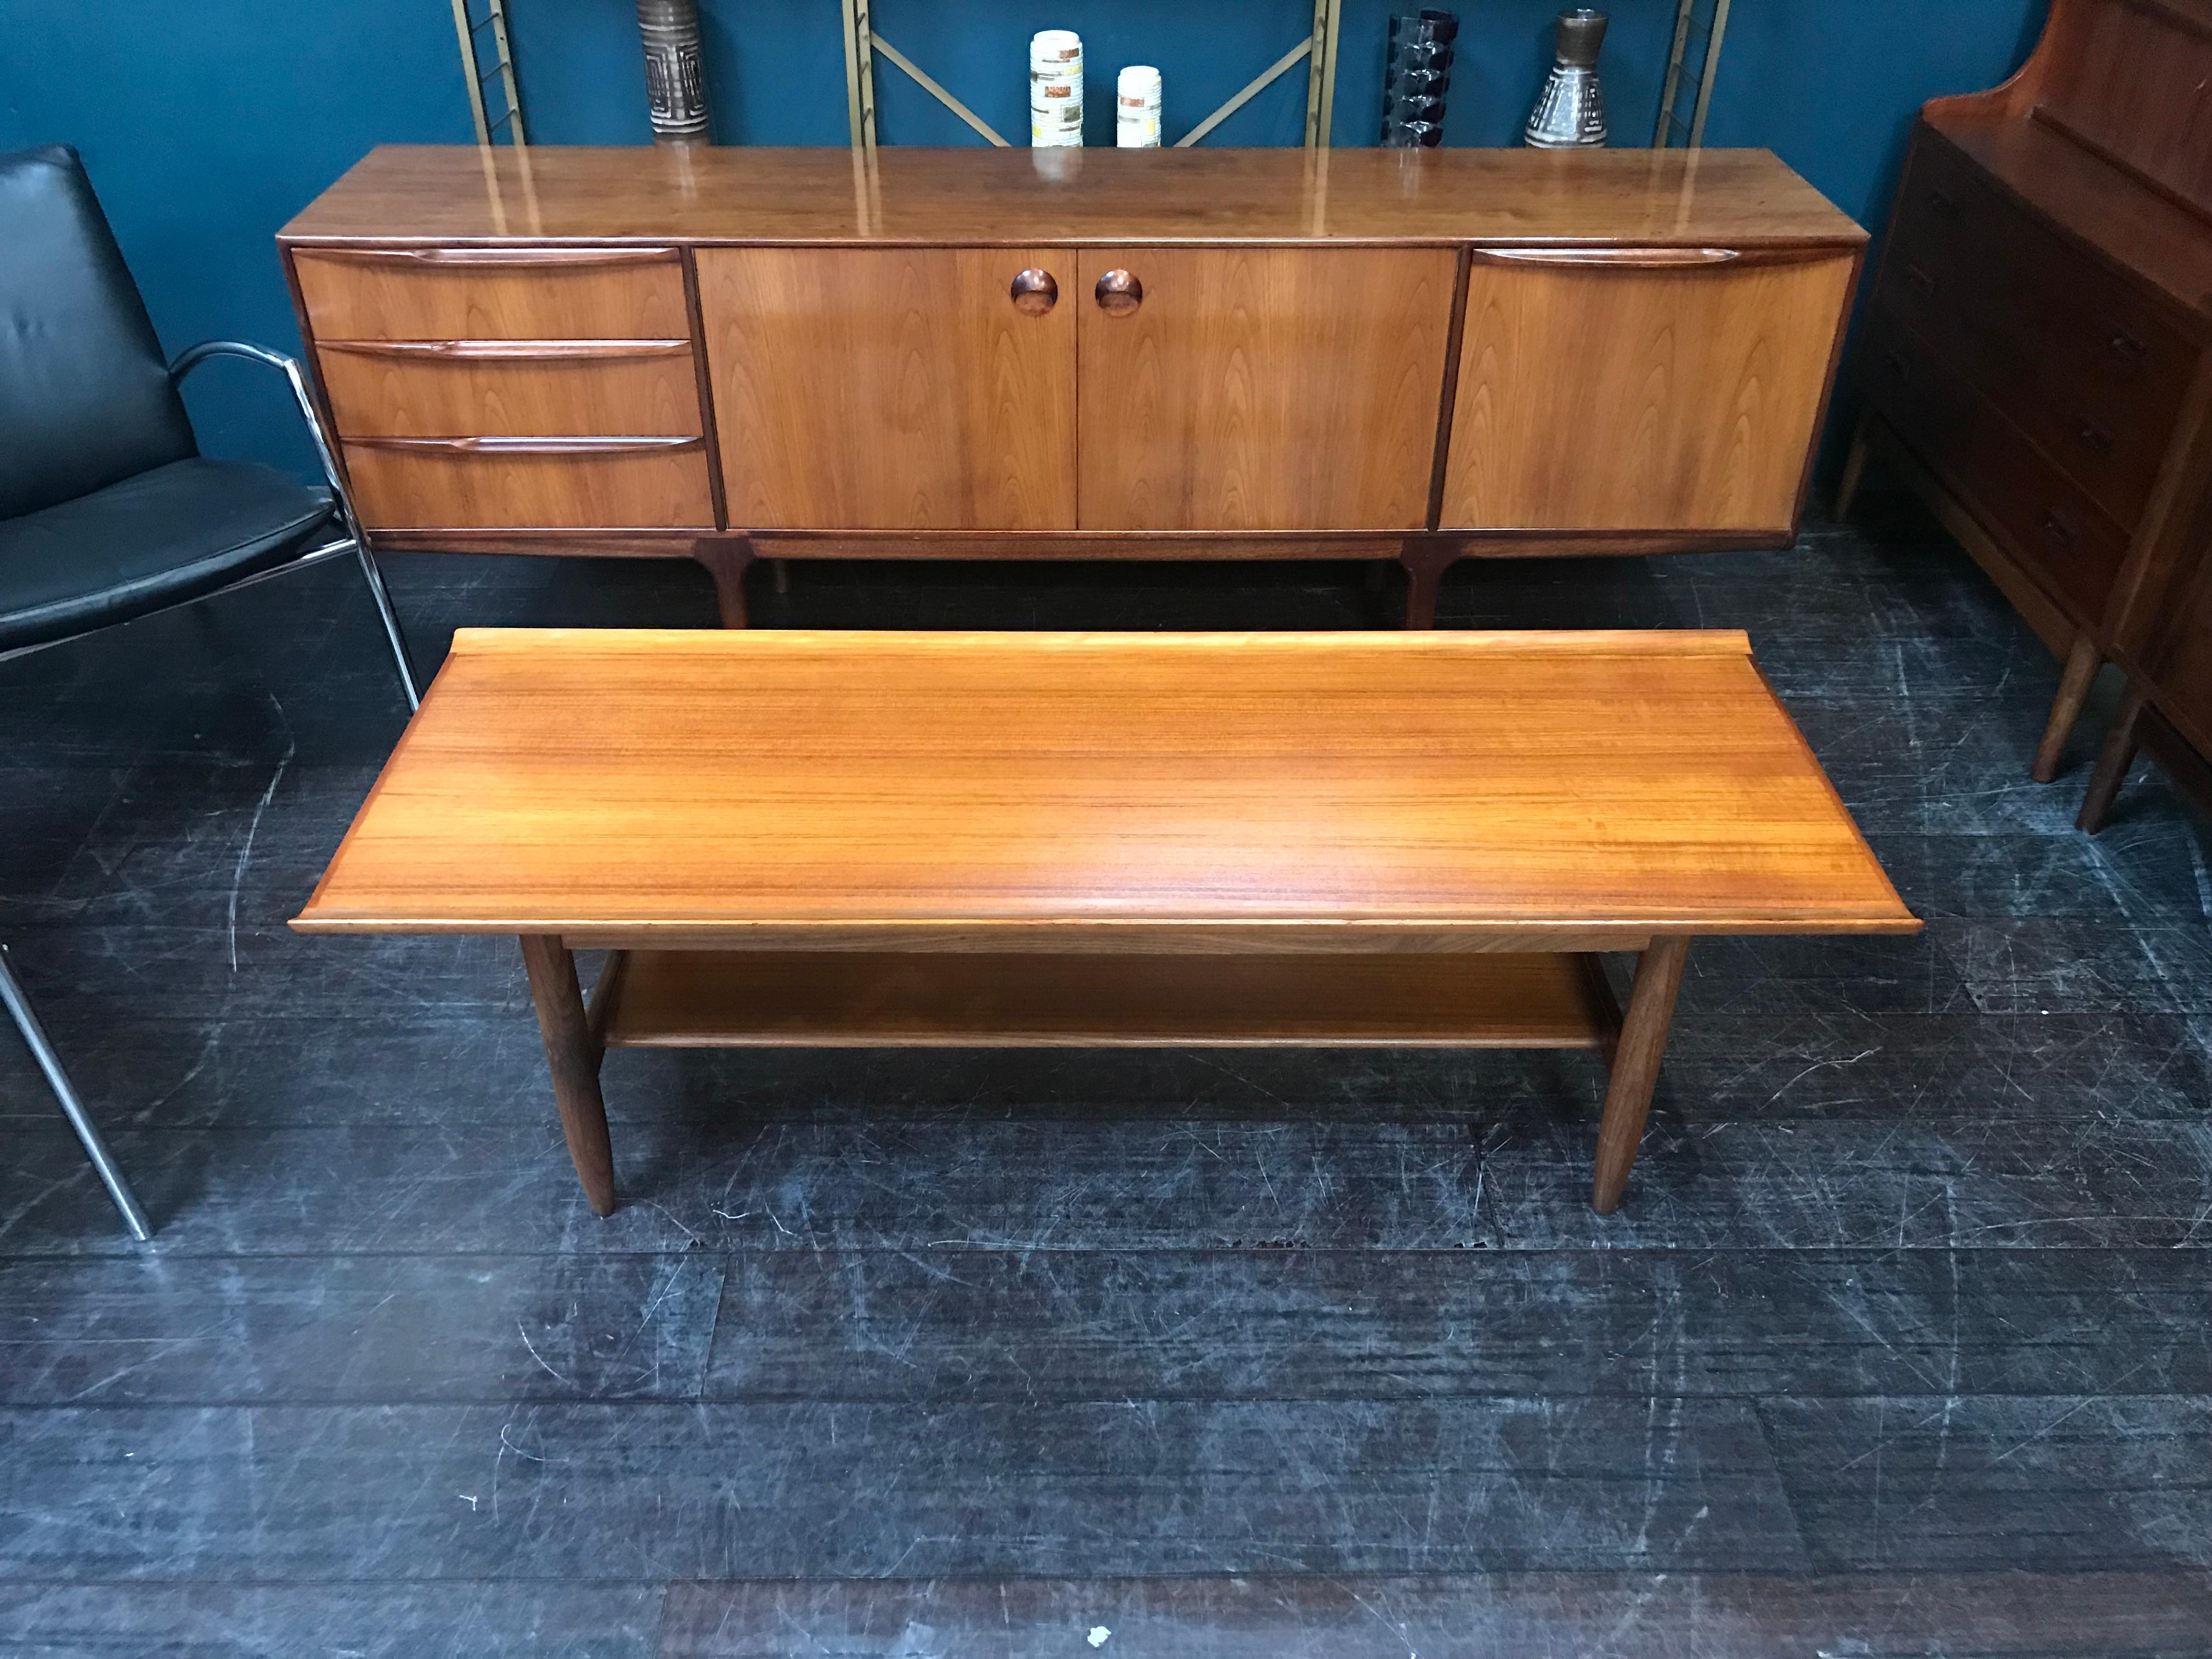 This teak coffee table was designed by Finn Juhl and manufactured by France & Son in Denmark in the 1960s. It is a truly stunning, long coffee table. The softly curved shaping of the two longer edges of the tabletop is beautiful both on the eye and